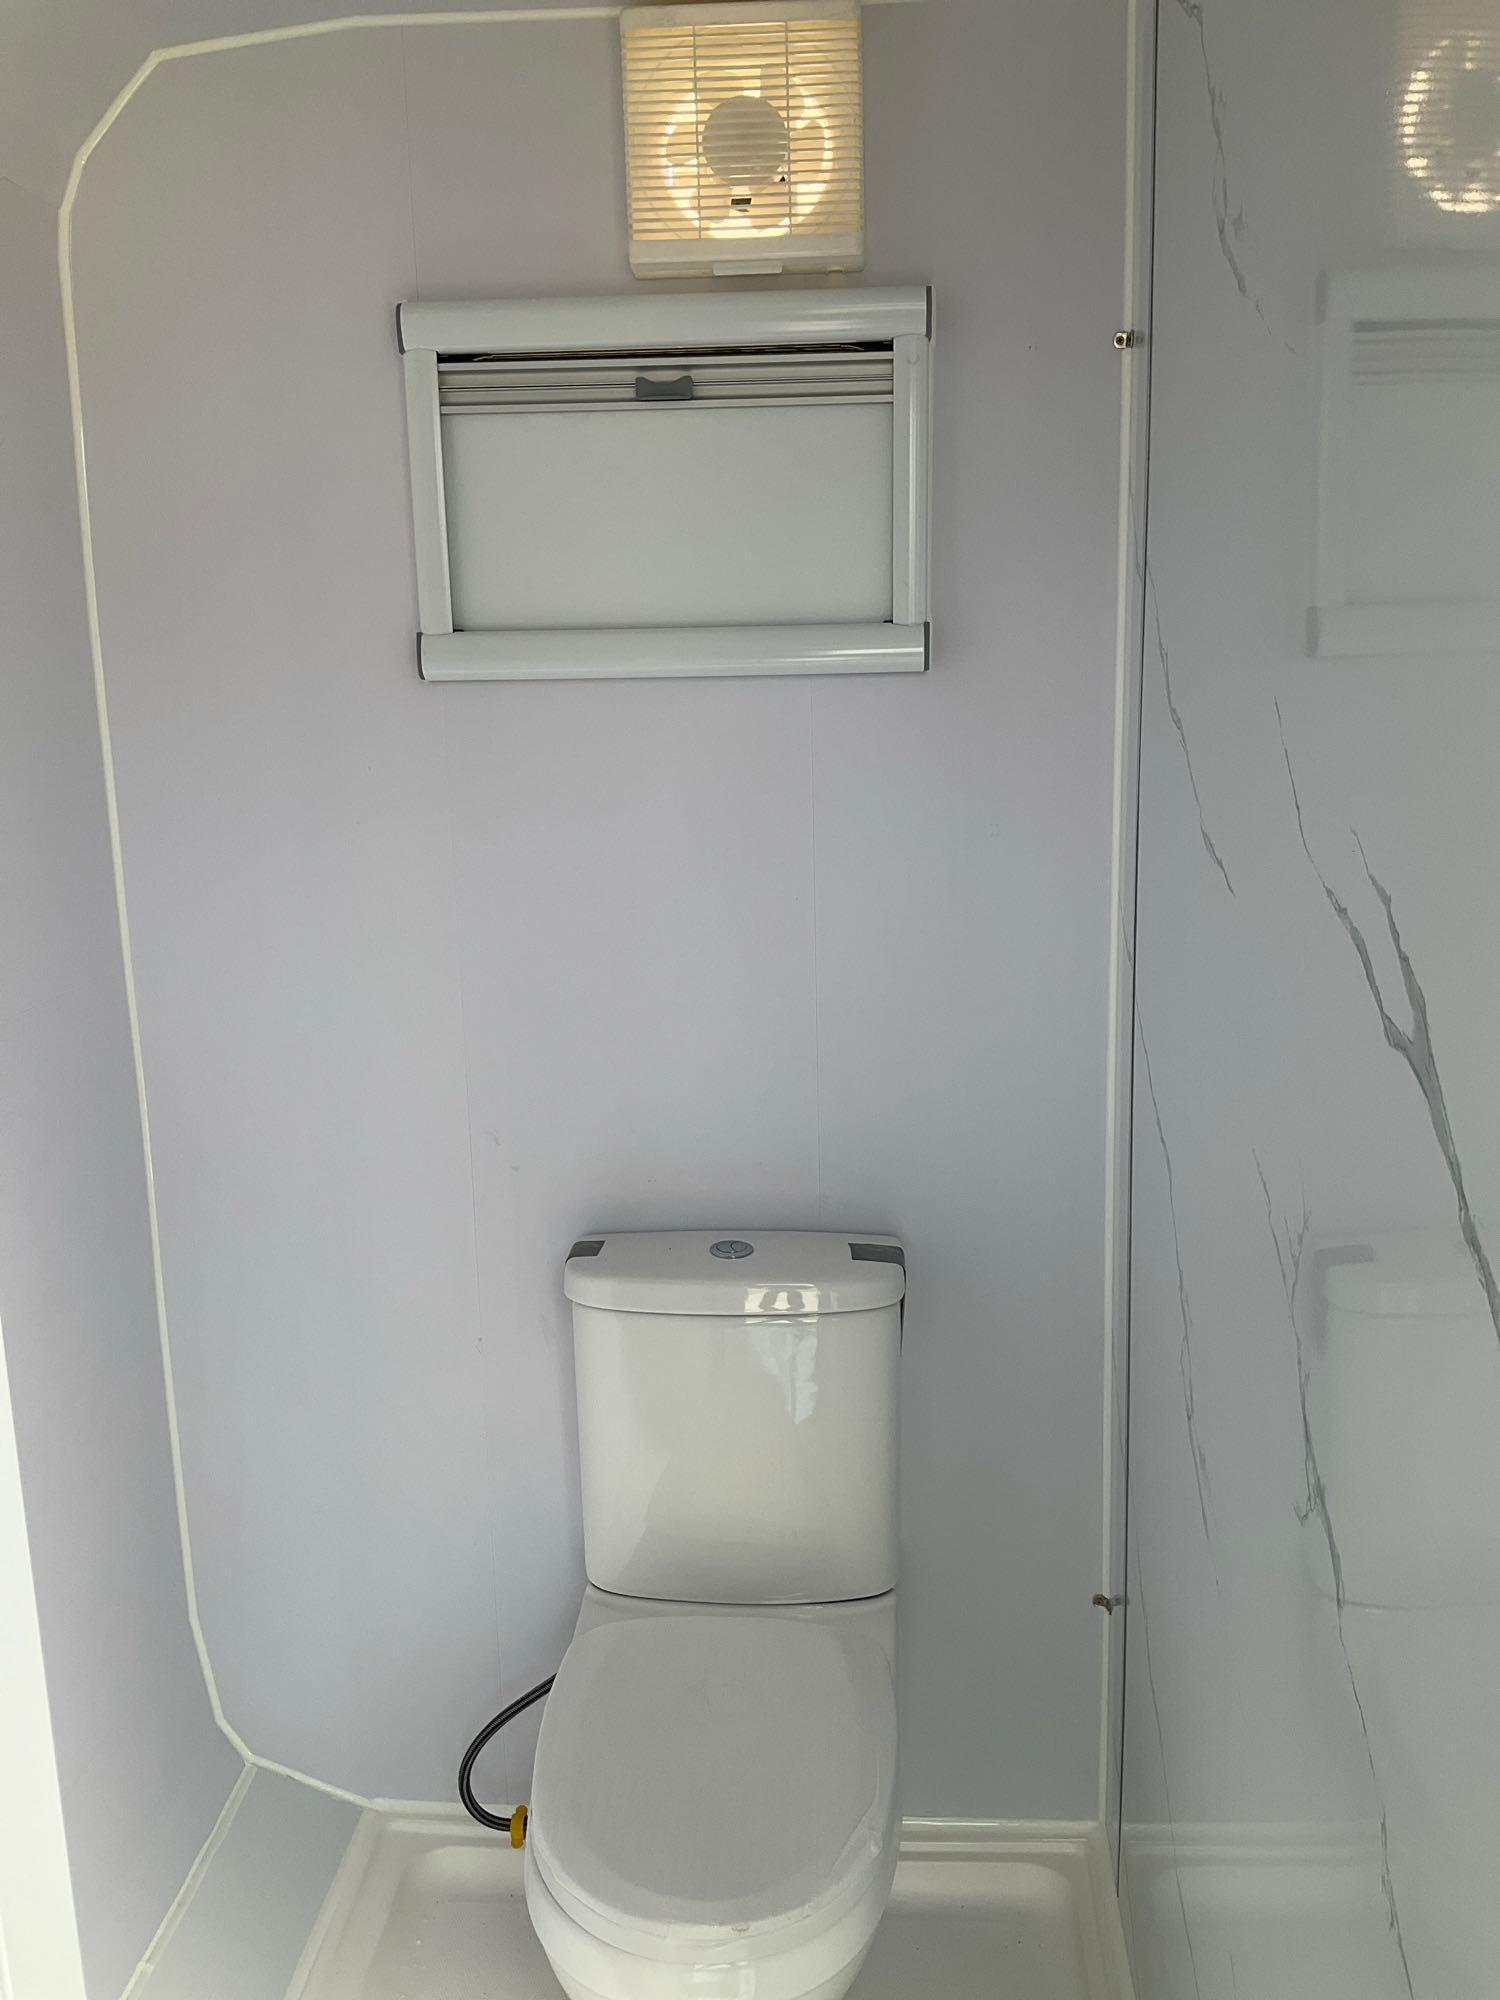 UNUSED 13FT...HOUSE WITH SHOWER ROOM, TOILET, WINDOW, PLUMBING AND ELECTRIC HOOK UP, 110V, LIGHTI...